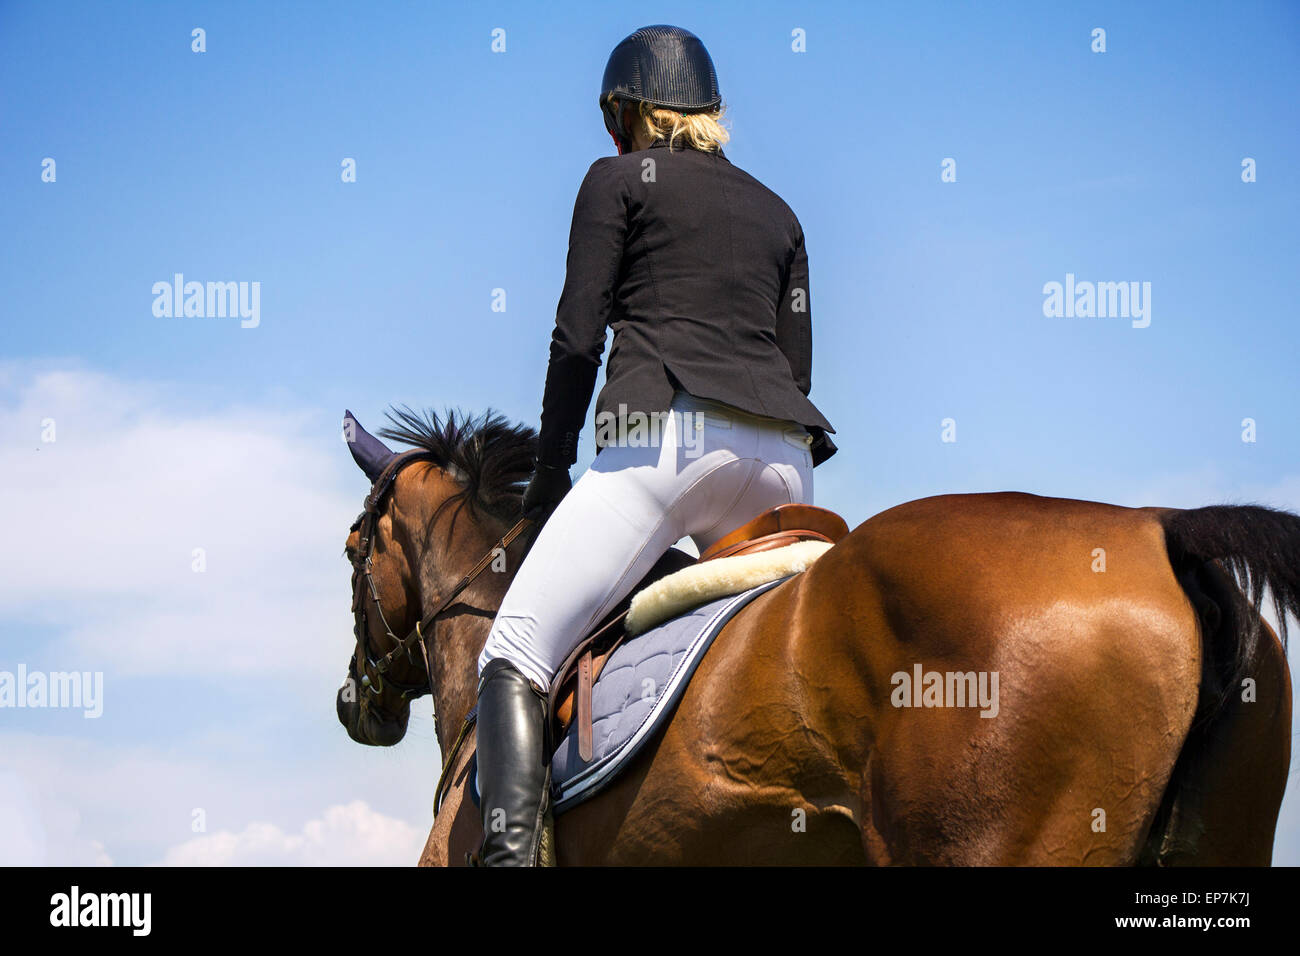 A rider on horseback competing in equestrian tournament Stock Photo